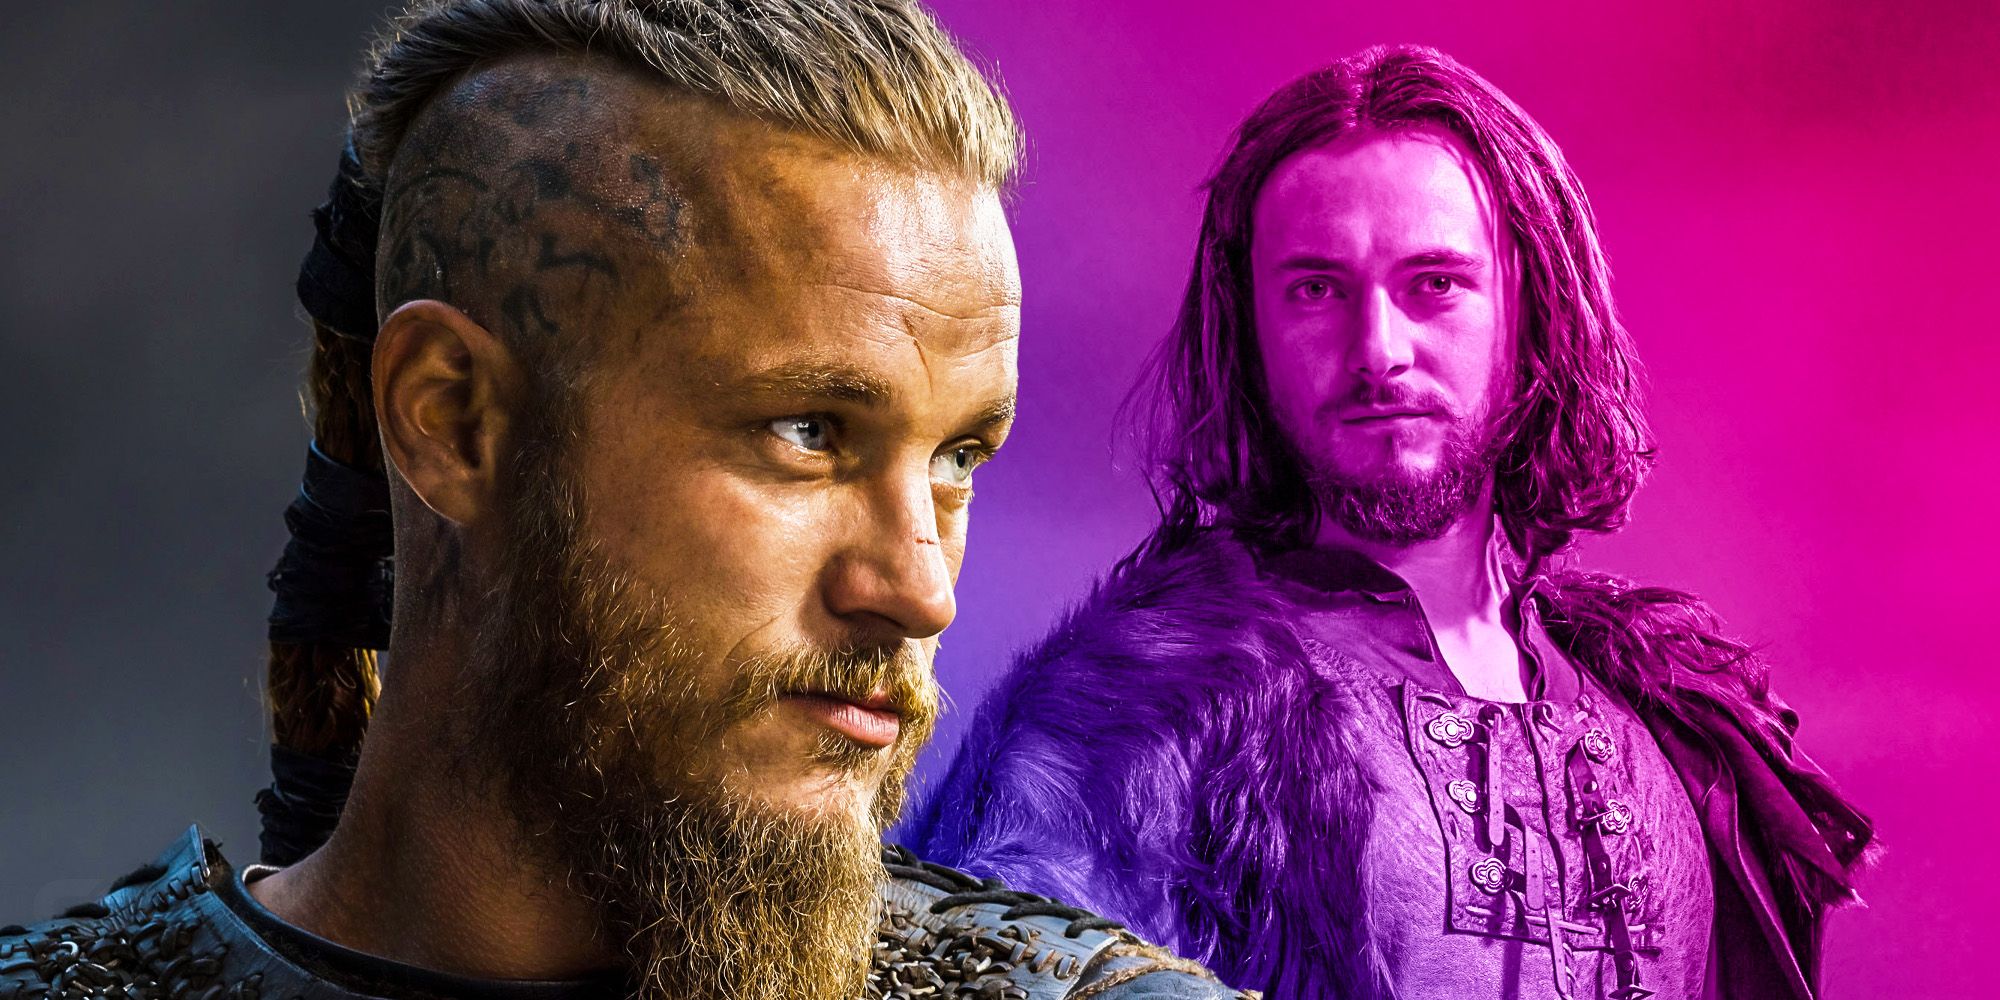 Why did Ragnar care about Athelstan?